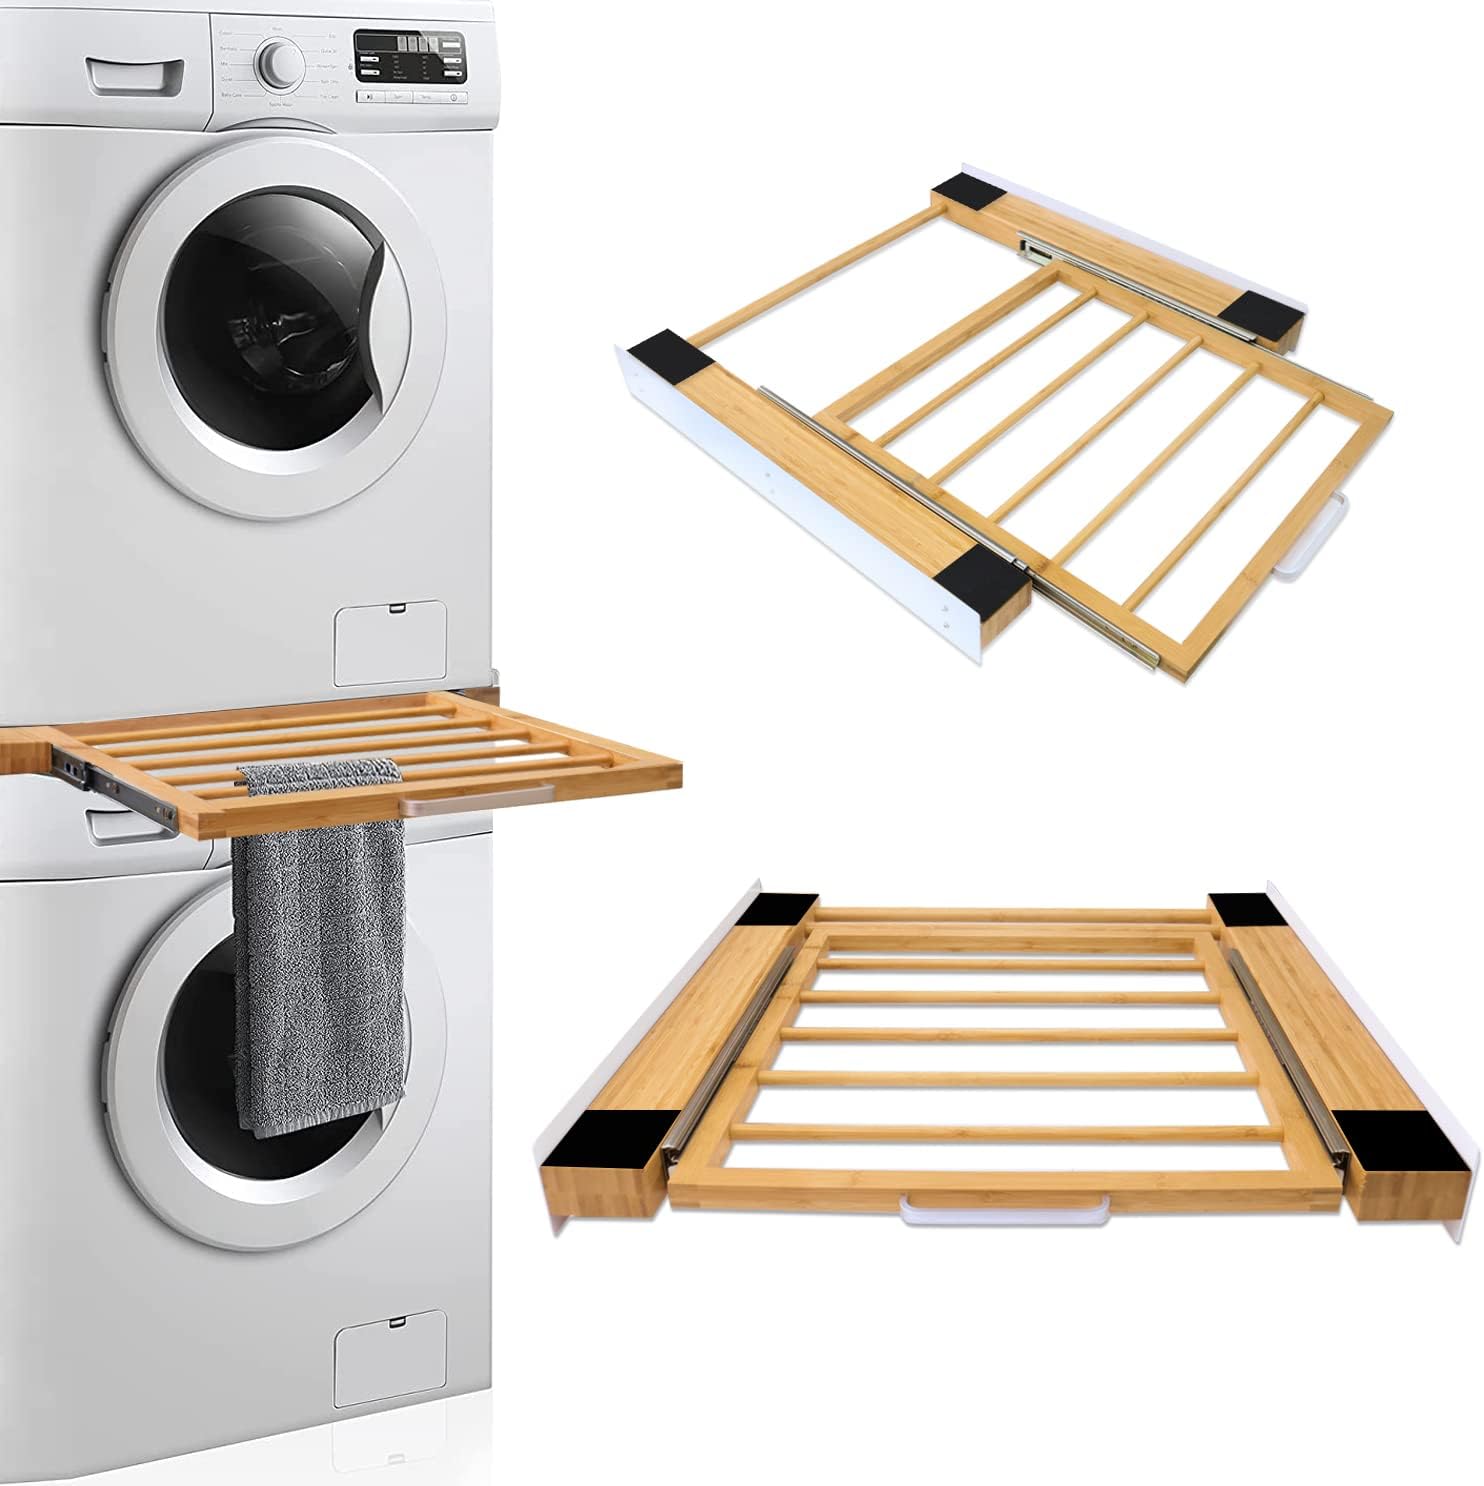 NIUXX Stacking Kit with Sliding Shelf, Fits for 46 - 60 cm Washing Machine and Dryer, Ratchet Rope Installation Frame Accessories for Connecting Tumble Washer Dryer, Ideal Housewarming Gift - Amazing Gadgets Outlet